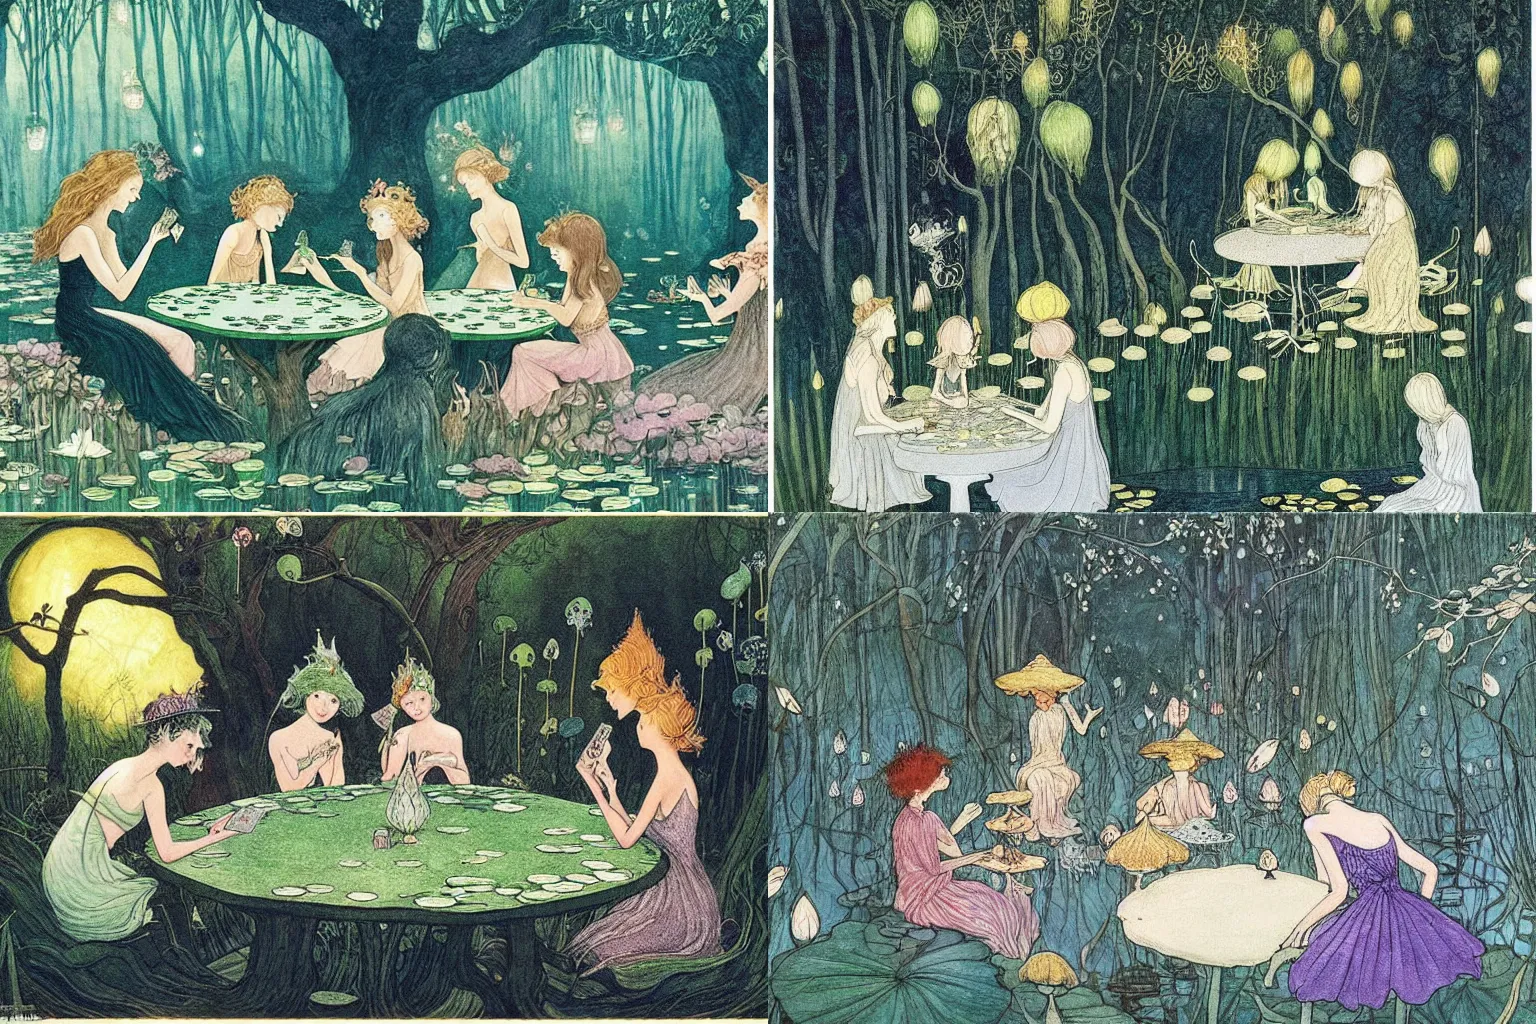 Prompt: a group of gracious fairies playing cards on a table in an atmospheric moonlit forest next to a beautiful pond filled with water lilies, artwork by ida rentoul outhwaite